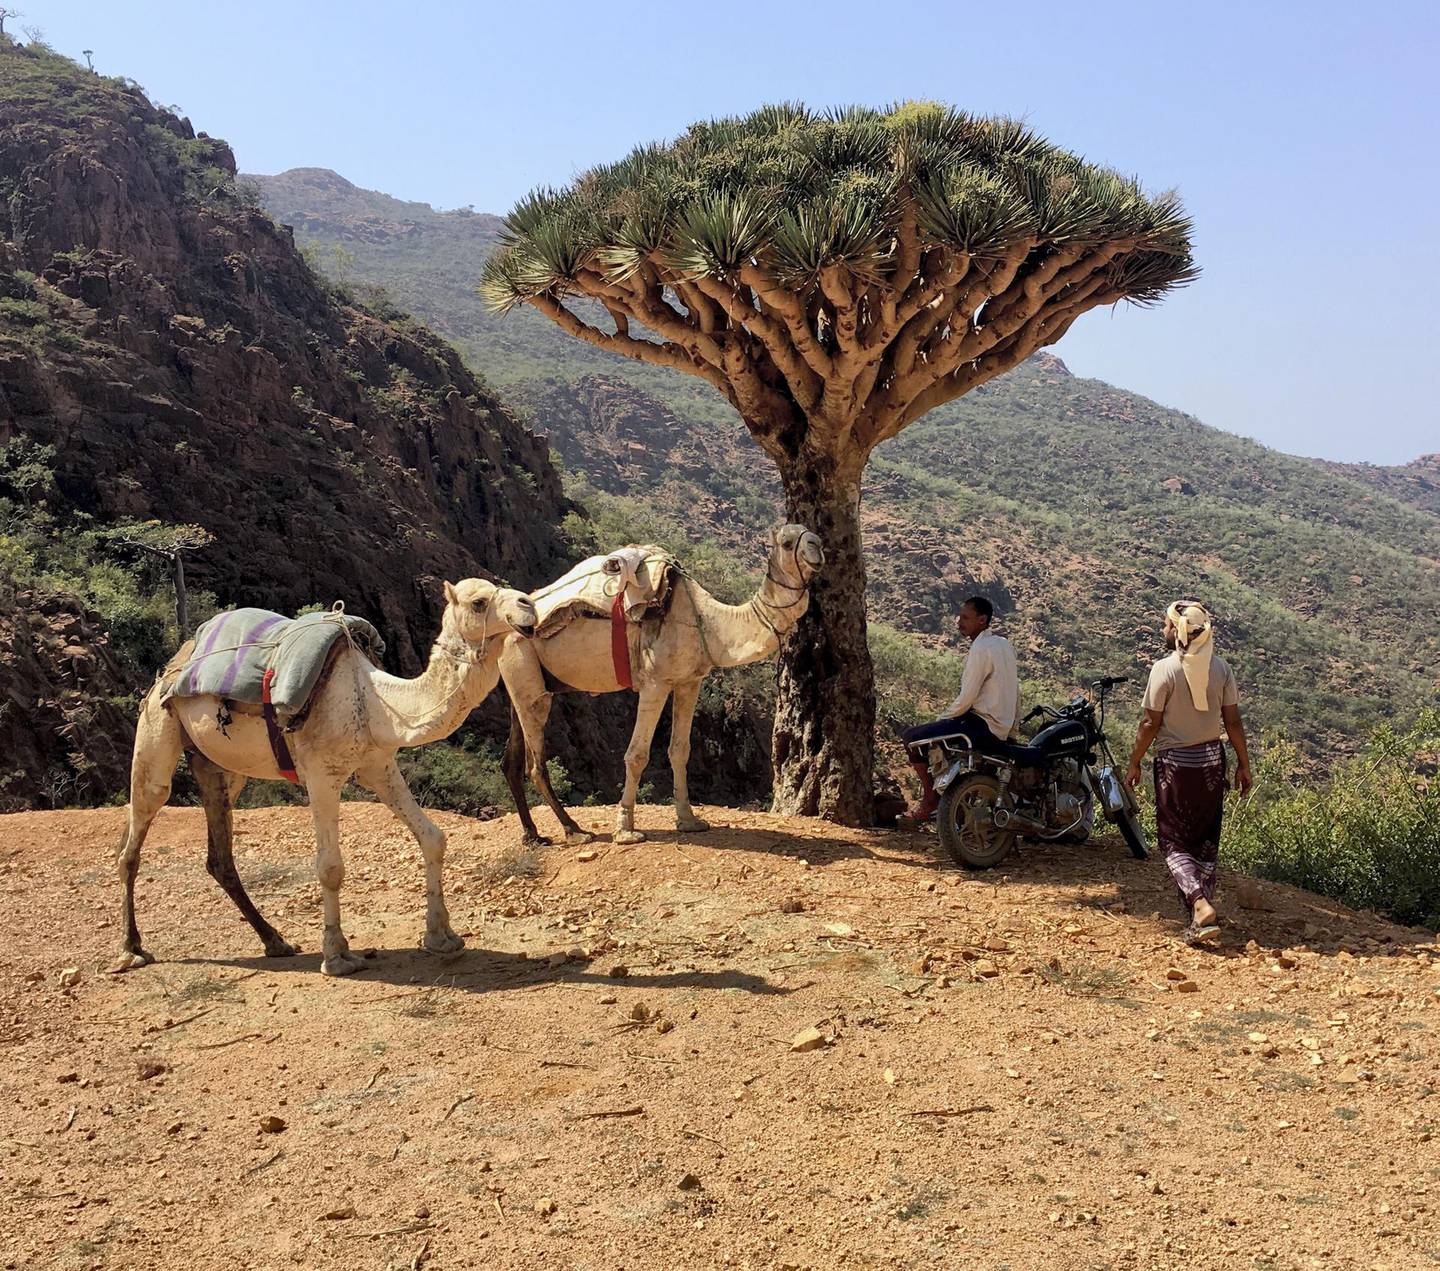 Socotra, a Yemeni archipelago near Somalia, to where a few years ago Al-Shamahi led a trip funded by the MBI Al Jaber Foundation as a reconnaissance for a potential large-scale interdisciplinary expedition that she hopes will proceed once the pandemic is under control. Courtesy Ella Al-Shamahi